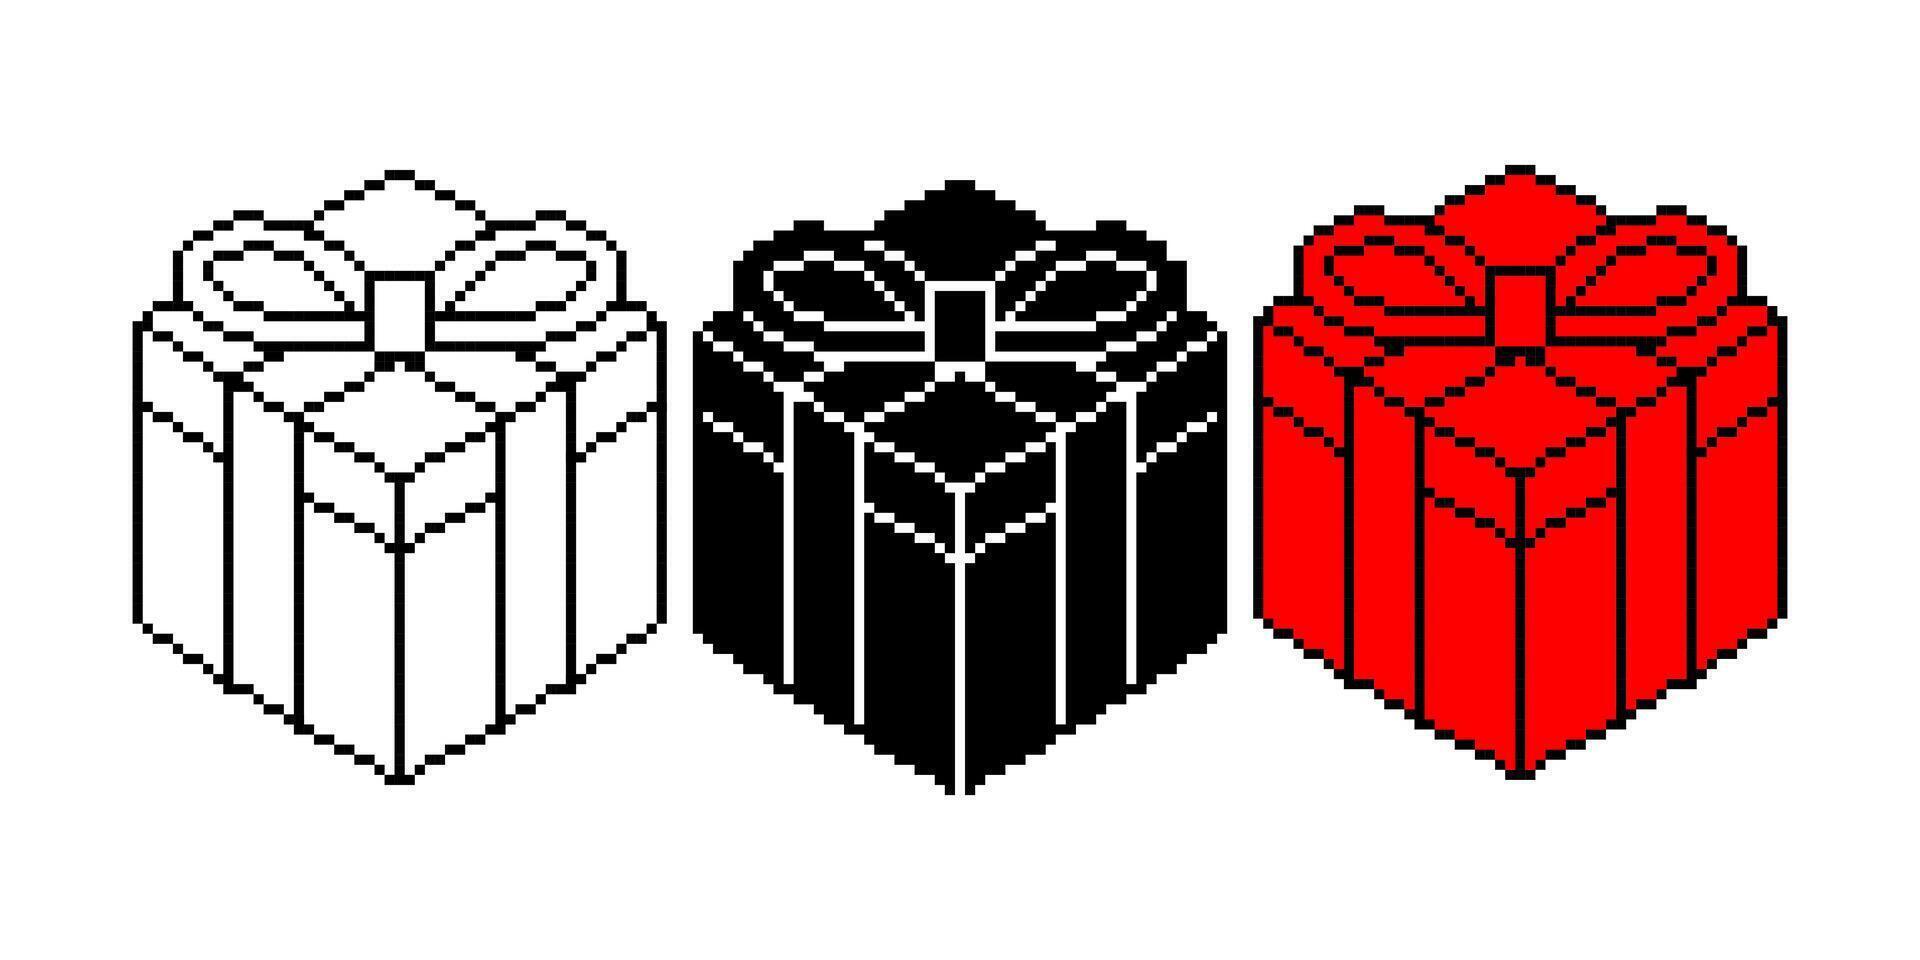 pixel art gift box icon set isolated on white background vector